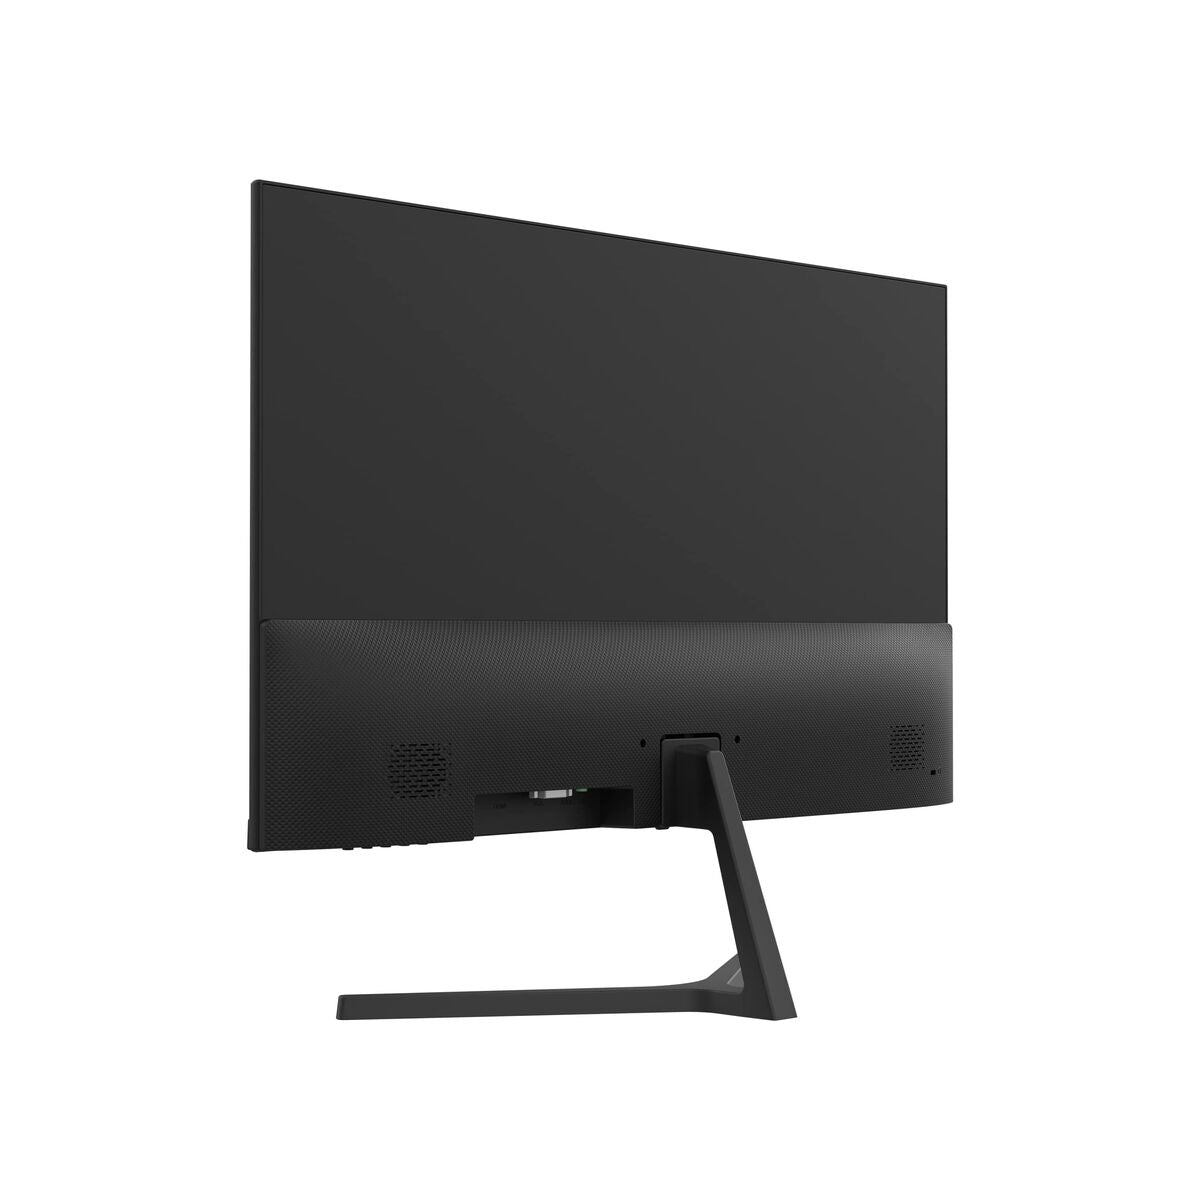 Monitor Dahua DHI-LM24-B200S 23,8" LED IPS Full HD 75 Hz, Dahua, Computing, monitor-dahua-hi-lm24-b200s-23-8-1080-px-led-ips, :Full HD, Brand_Dahua, category-reference-2609, category-reference-2642, category-reference-2644, category-reference-t-19685, computers / peripherals, Condition_NEW, office, Price_100 - 200, Teleworking, RiotNook